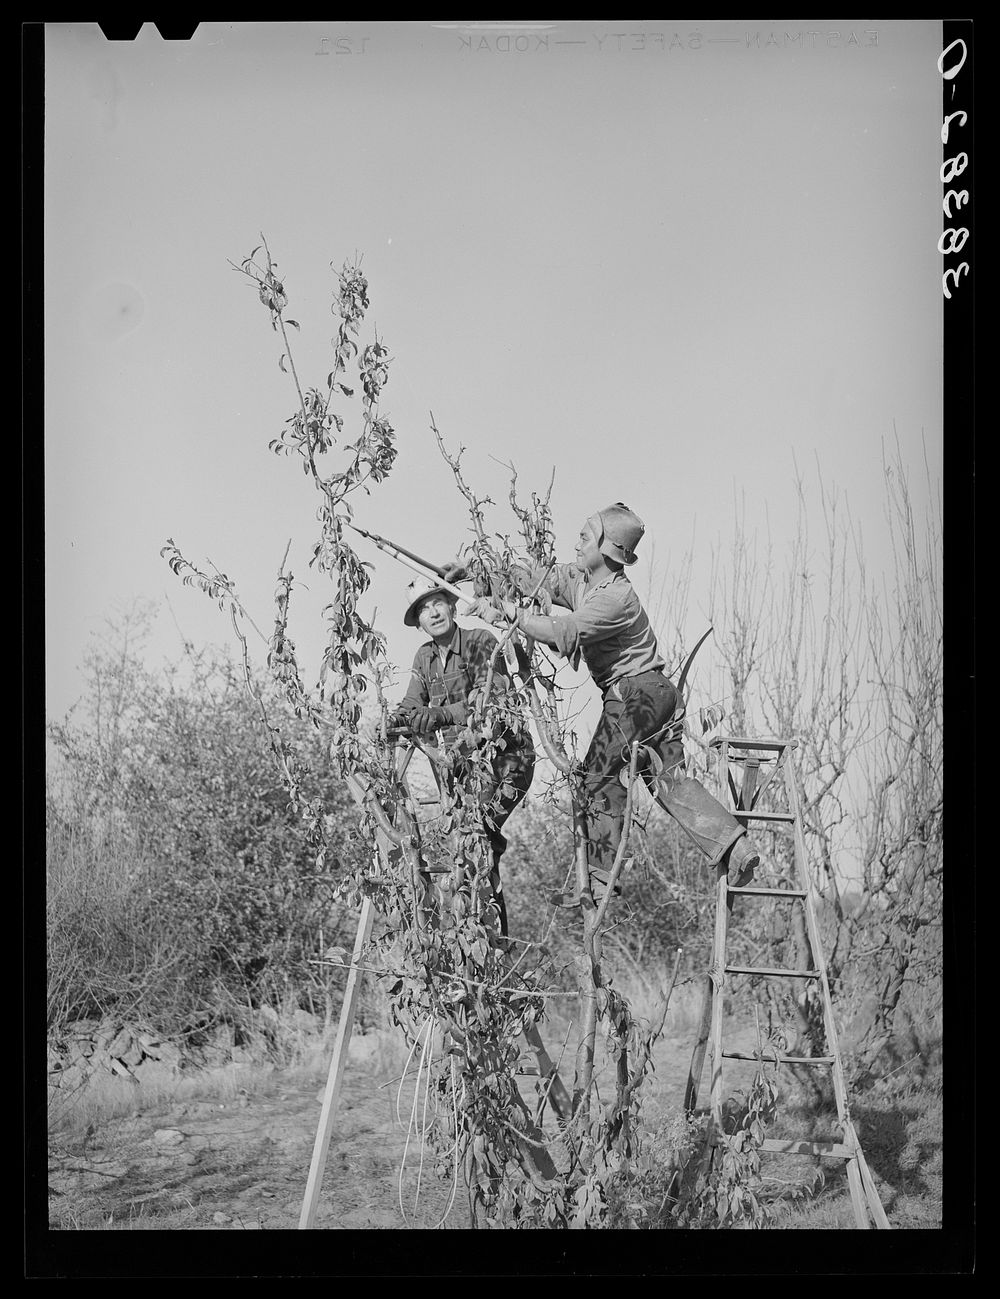 Pruning fruit trees. Placer County, California by Russell Lee